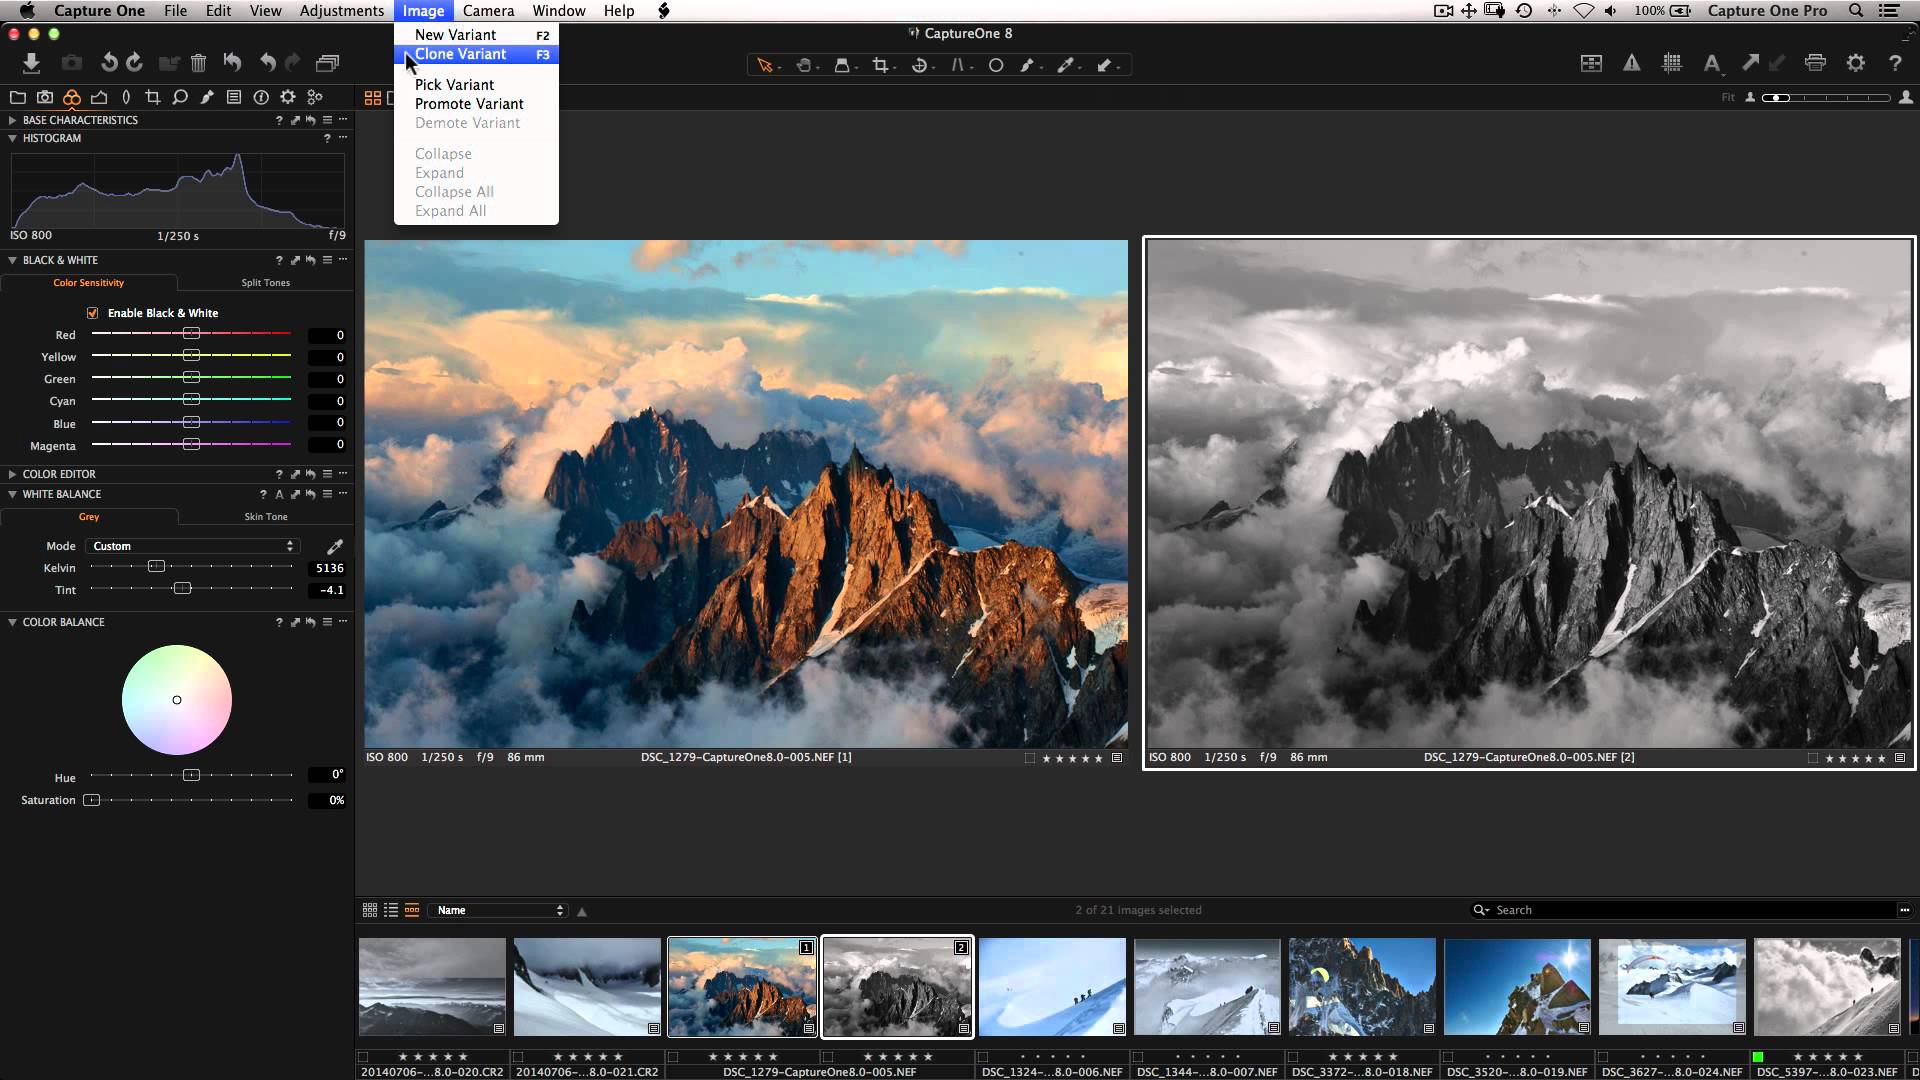 Capture One 23 Pro 16.2.2.1406 download the new version